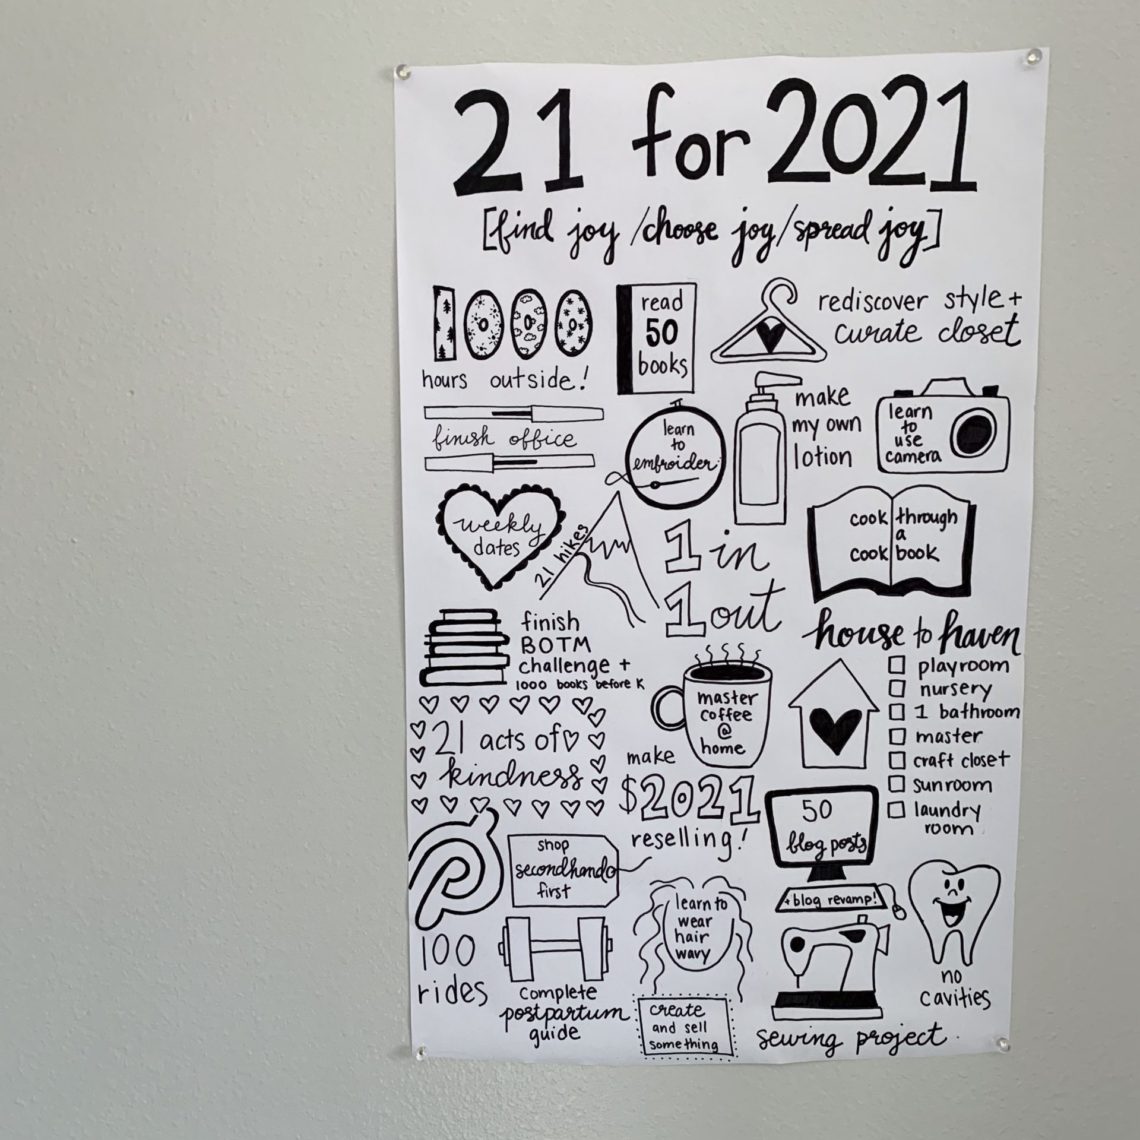 21 for 2021: 21 goals to do in 2021! #21in2021 #2021 #newyearsresolutions #newyearsgoals